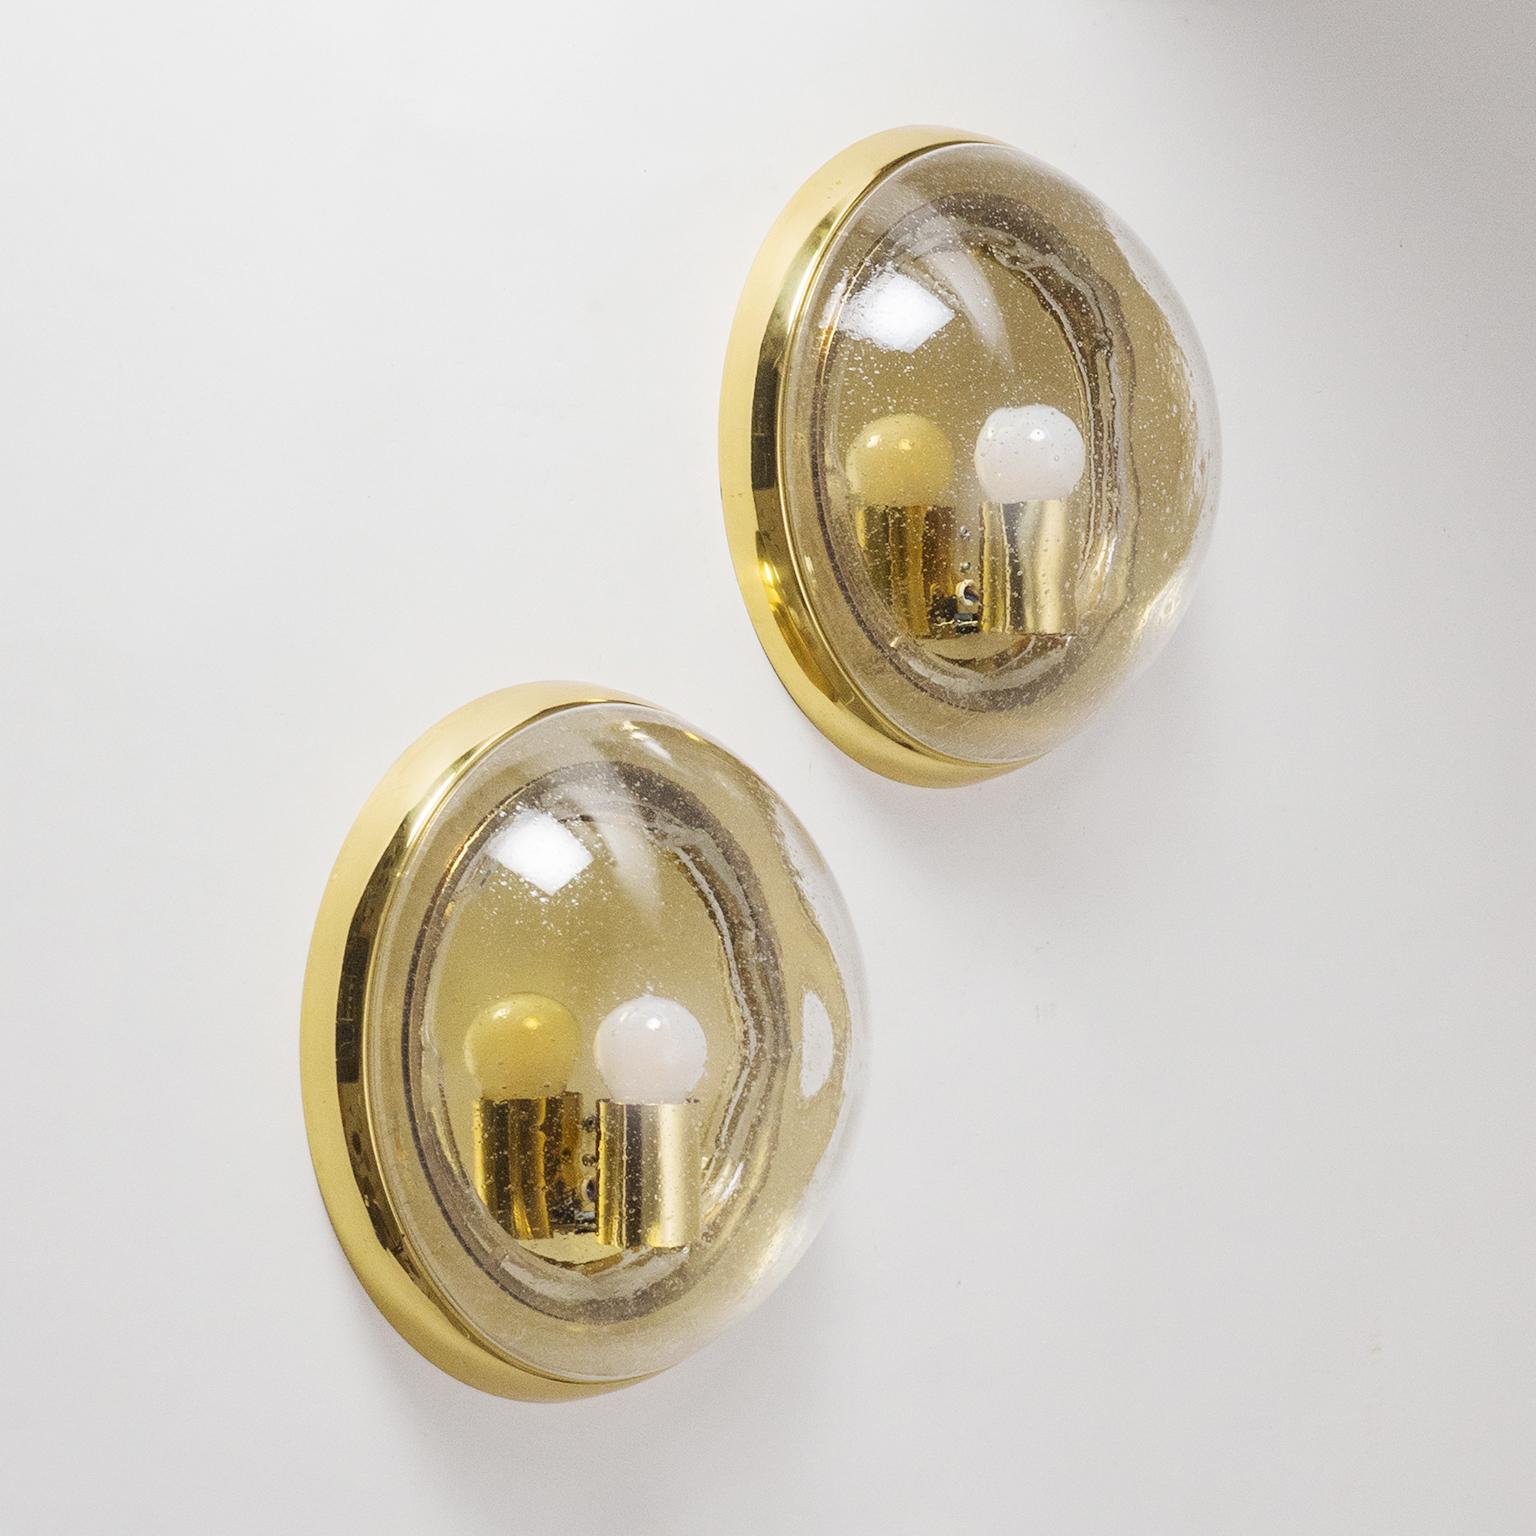 Large pair of brass 'bullseye' wall or ceiling lights by Hillebrand, Germany, 1970s. The blown clear glass domes are filled with small bubbles and have a slightly irregular surface contrasting nicely with the smooth brass hardware. Very good